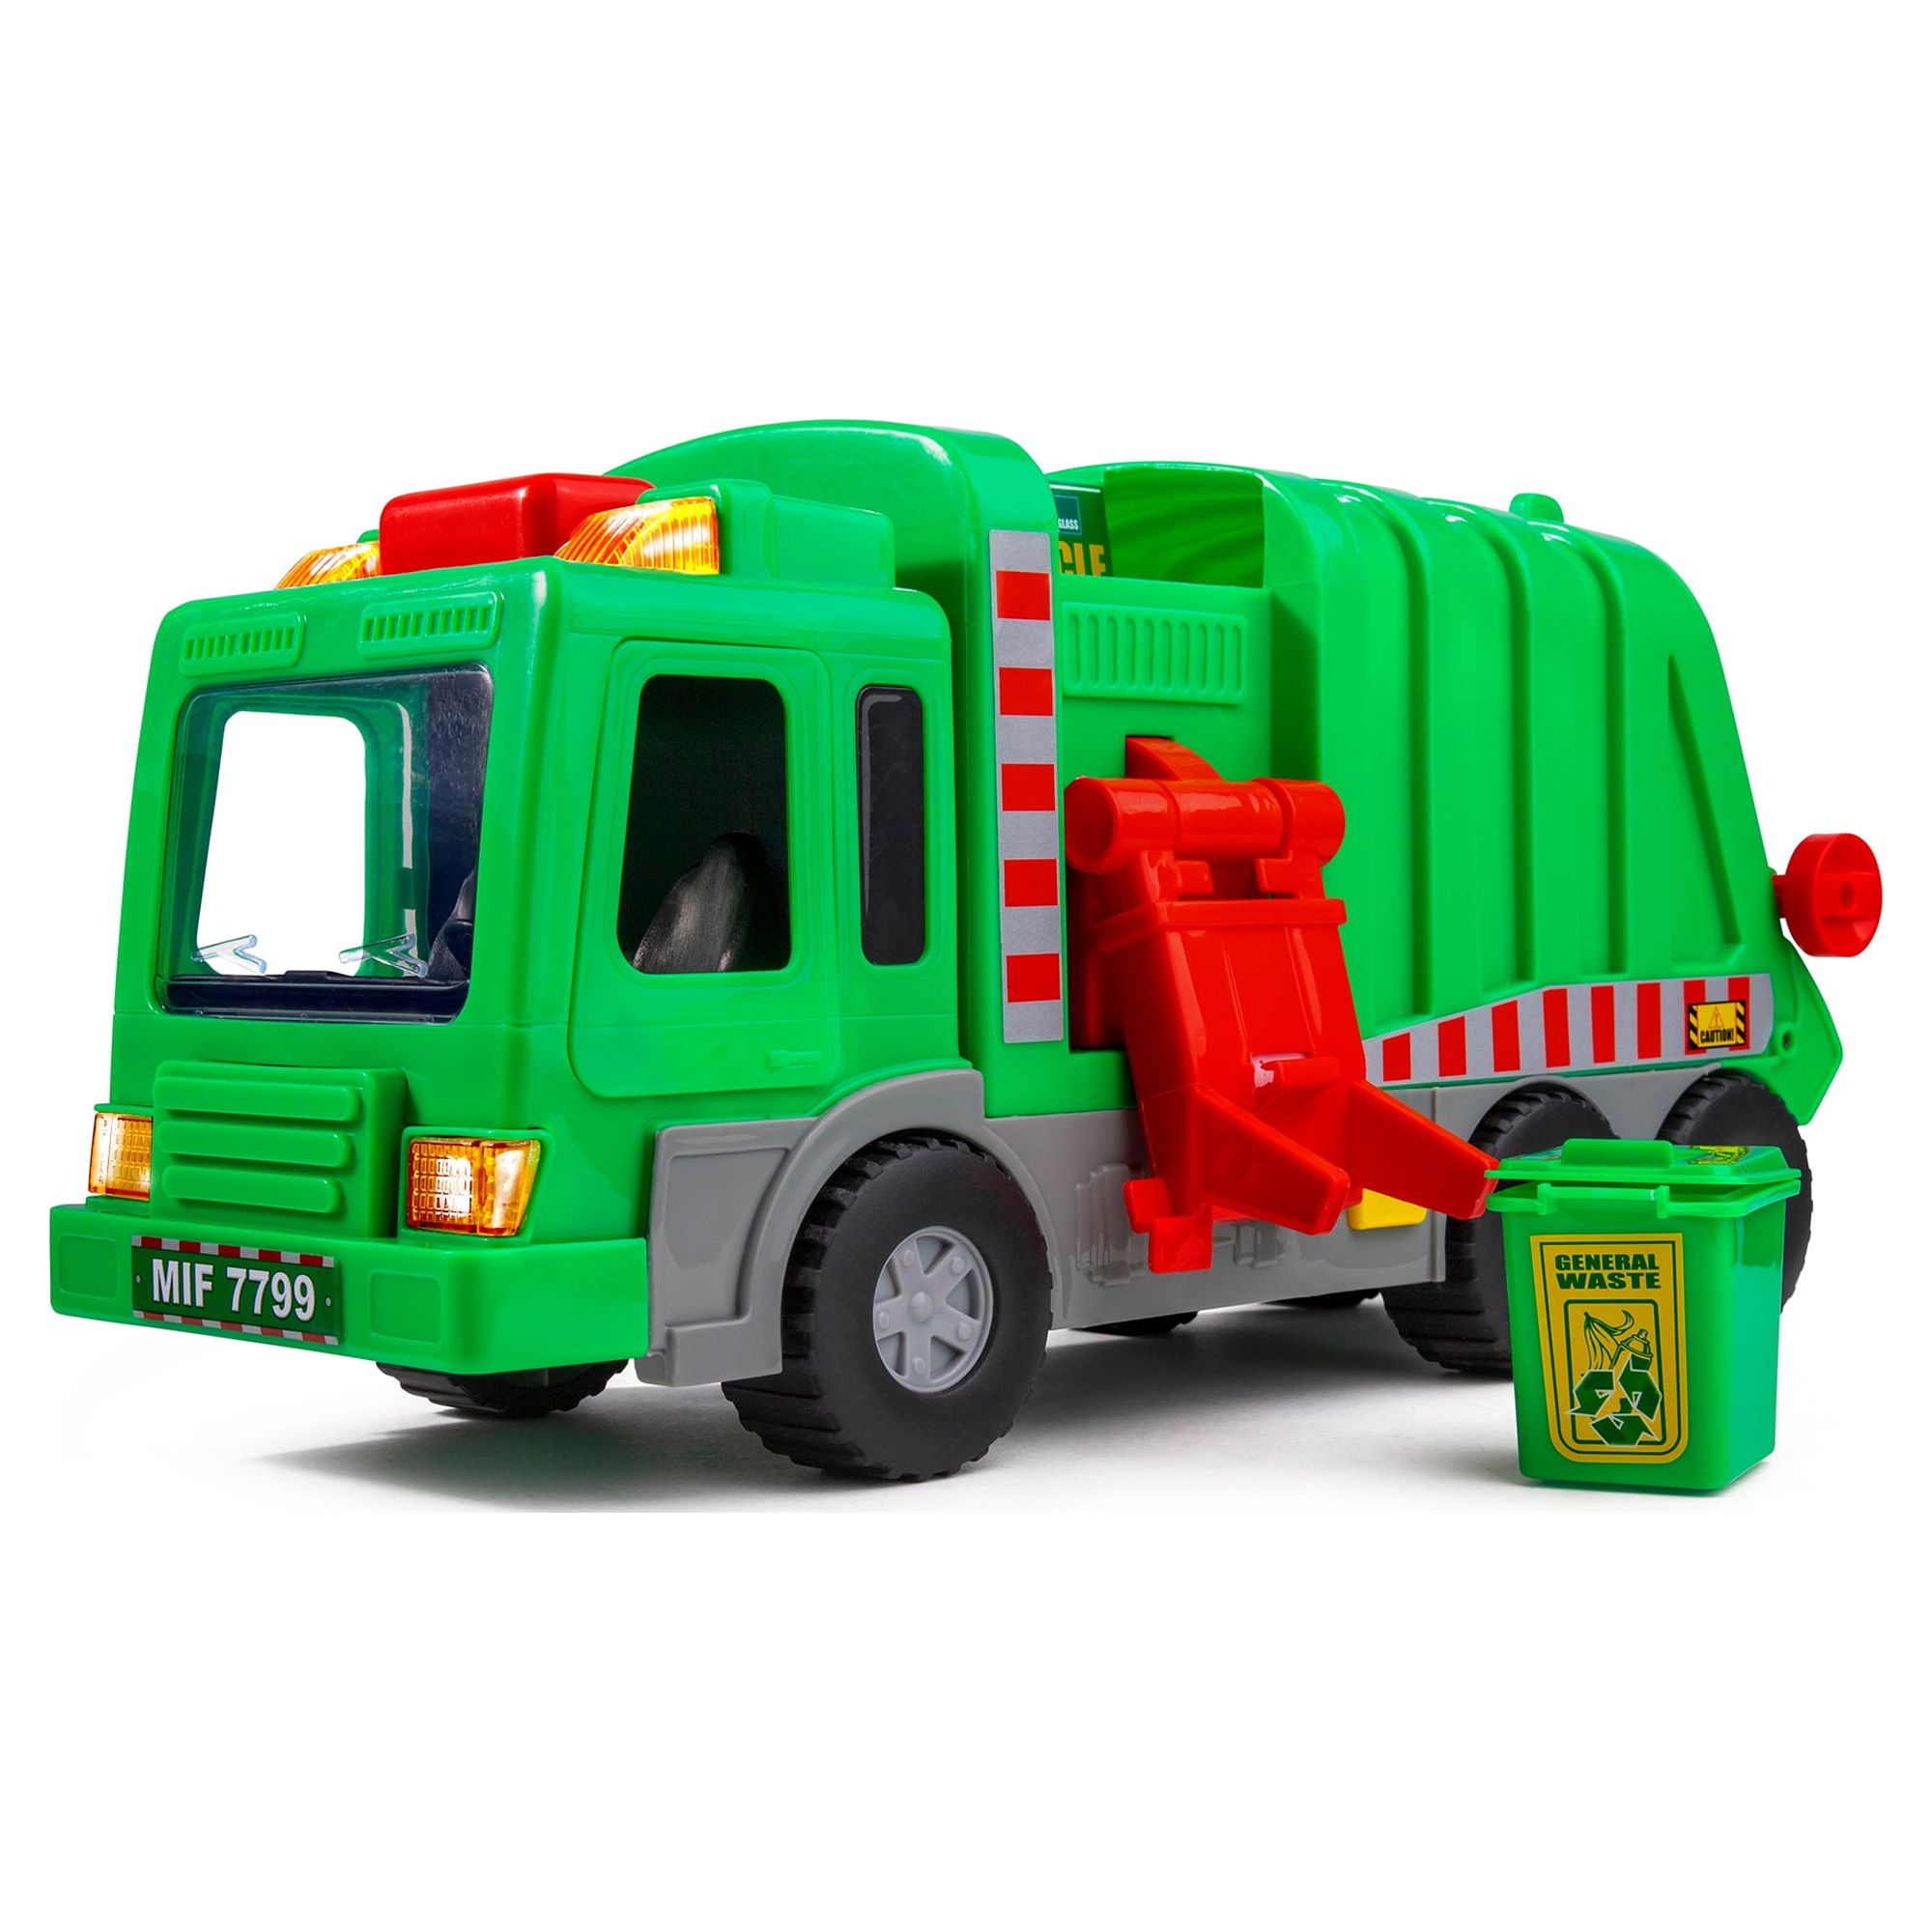 Playkidz Kids 15" Garbage Truck Toy with Lights, Sounds, and Manual Trash Lid, Interactive Early Learning Play for Kids, Indoor and Outdoor Safe, Heavy Duty Plastic - image 1 of 7